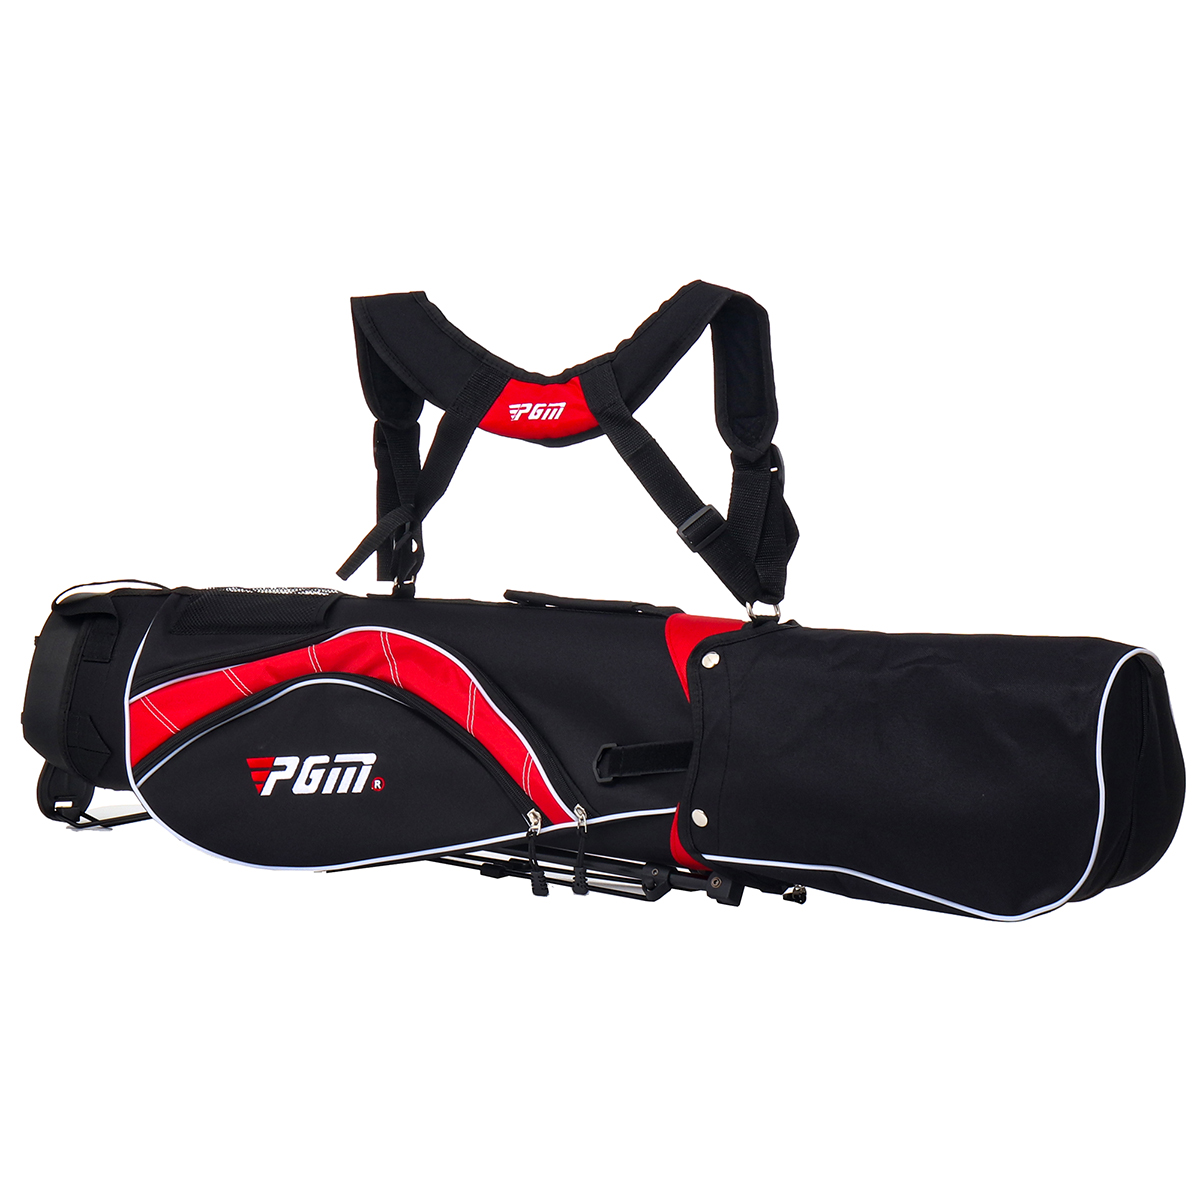 Childrens-Golf-Bag-Golf-Support-Ultra-Light-Stand-Portable-Large-Capacity-Double-Shoulder-Strap-For--1810143-7